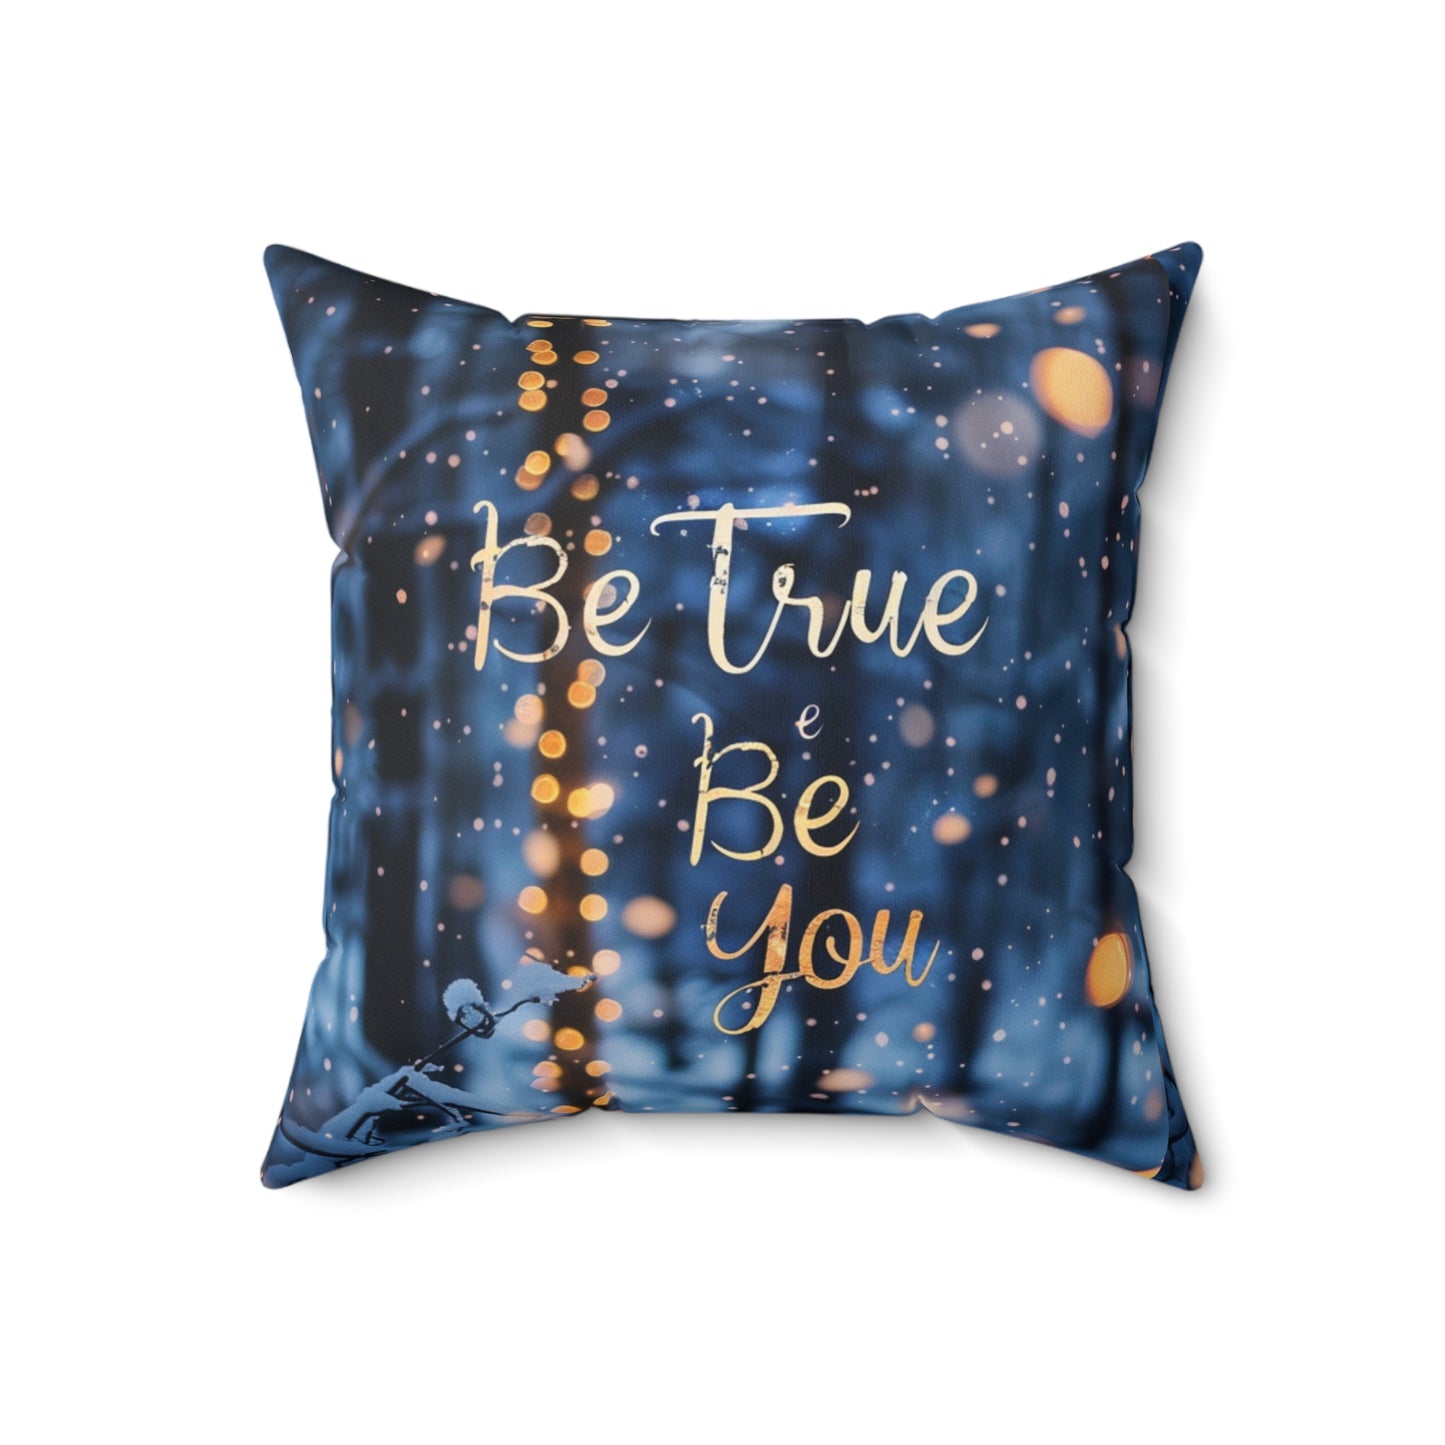 Spun Polyester Square Pillow - Be true be you